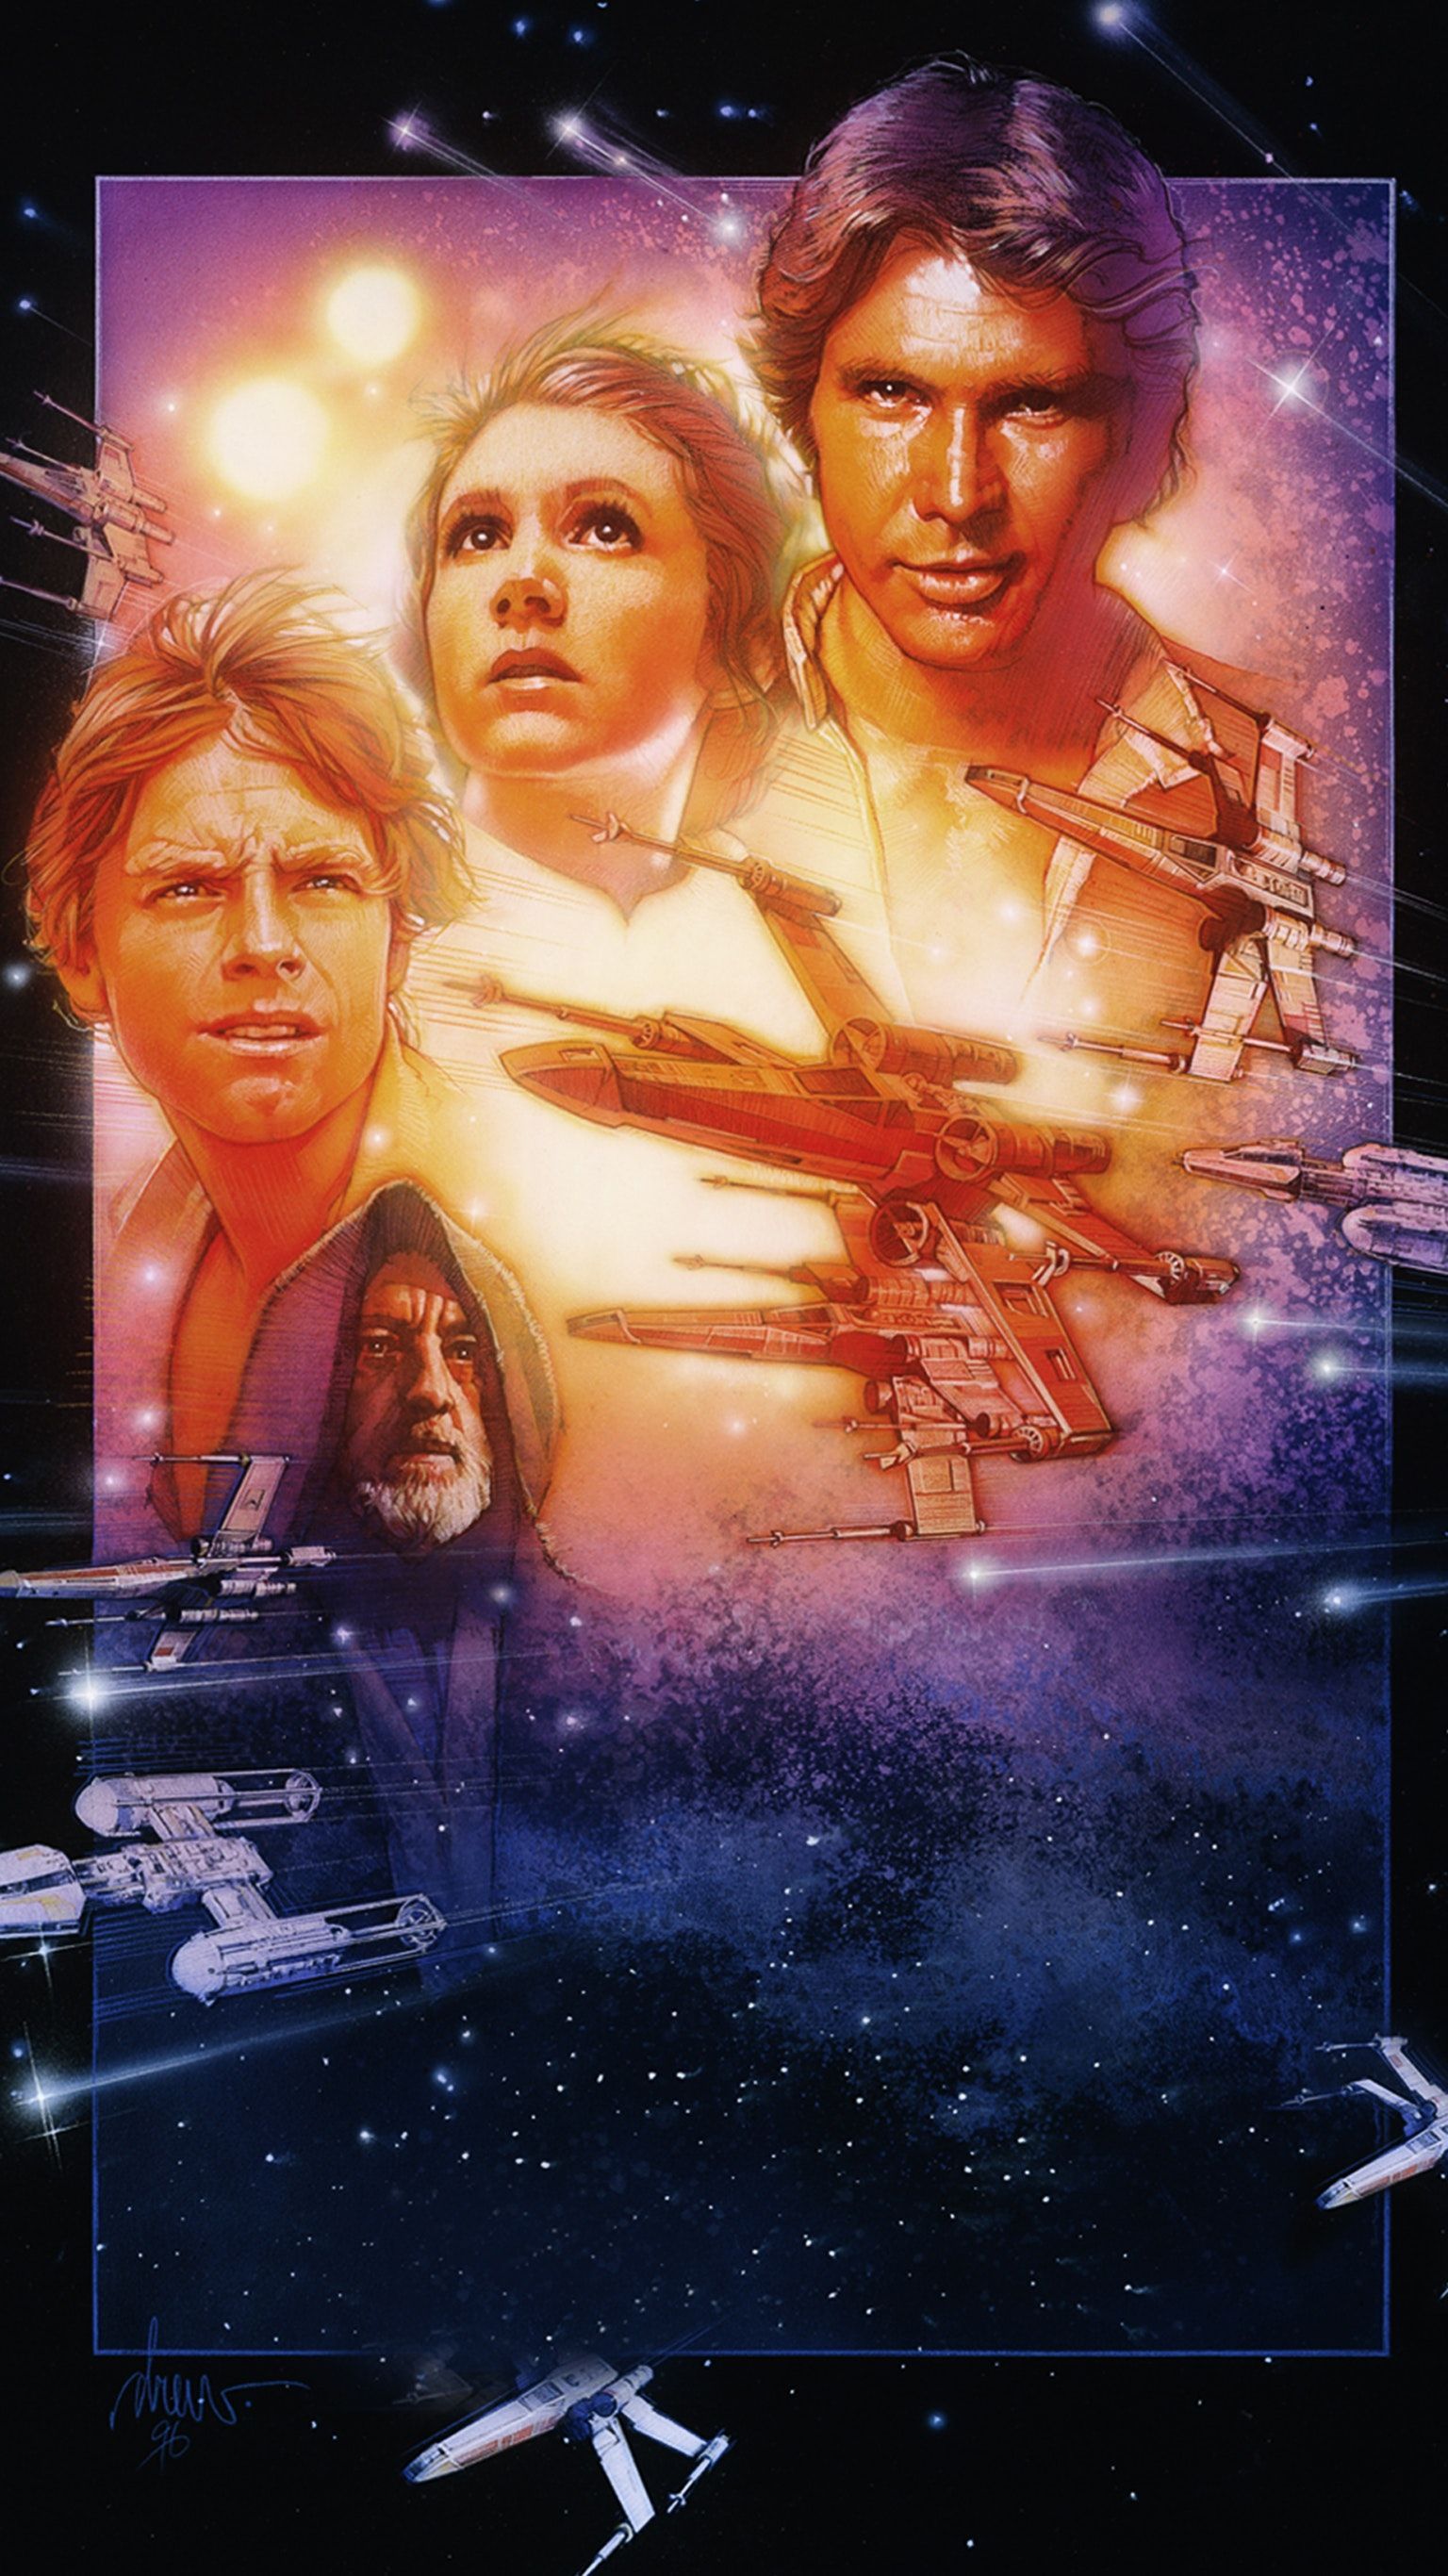 Star Wars Episode IV A New Hope Wallpapers Wallpaper Cave